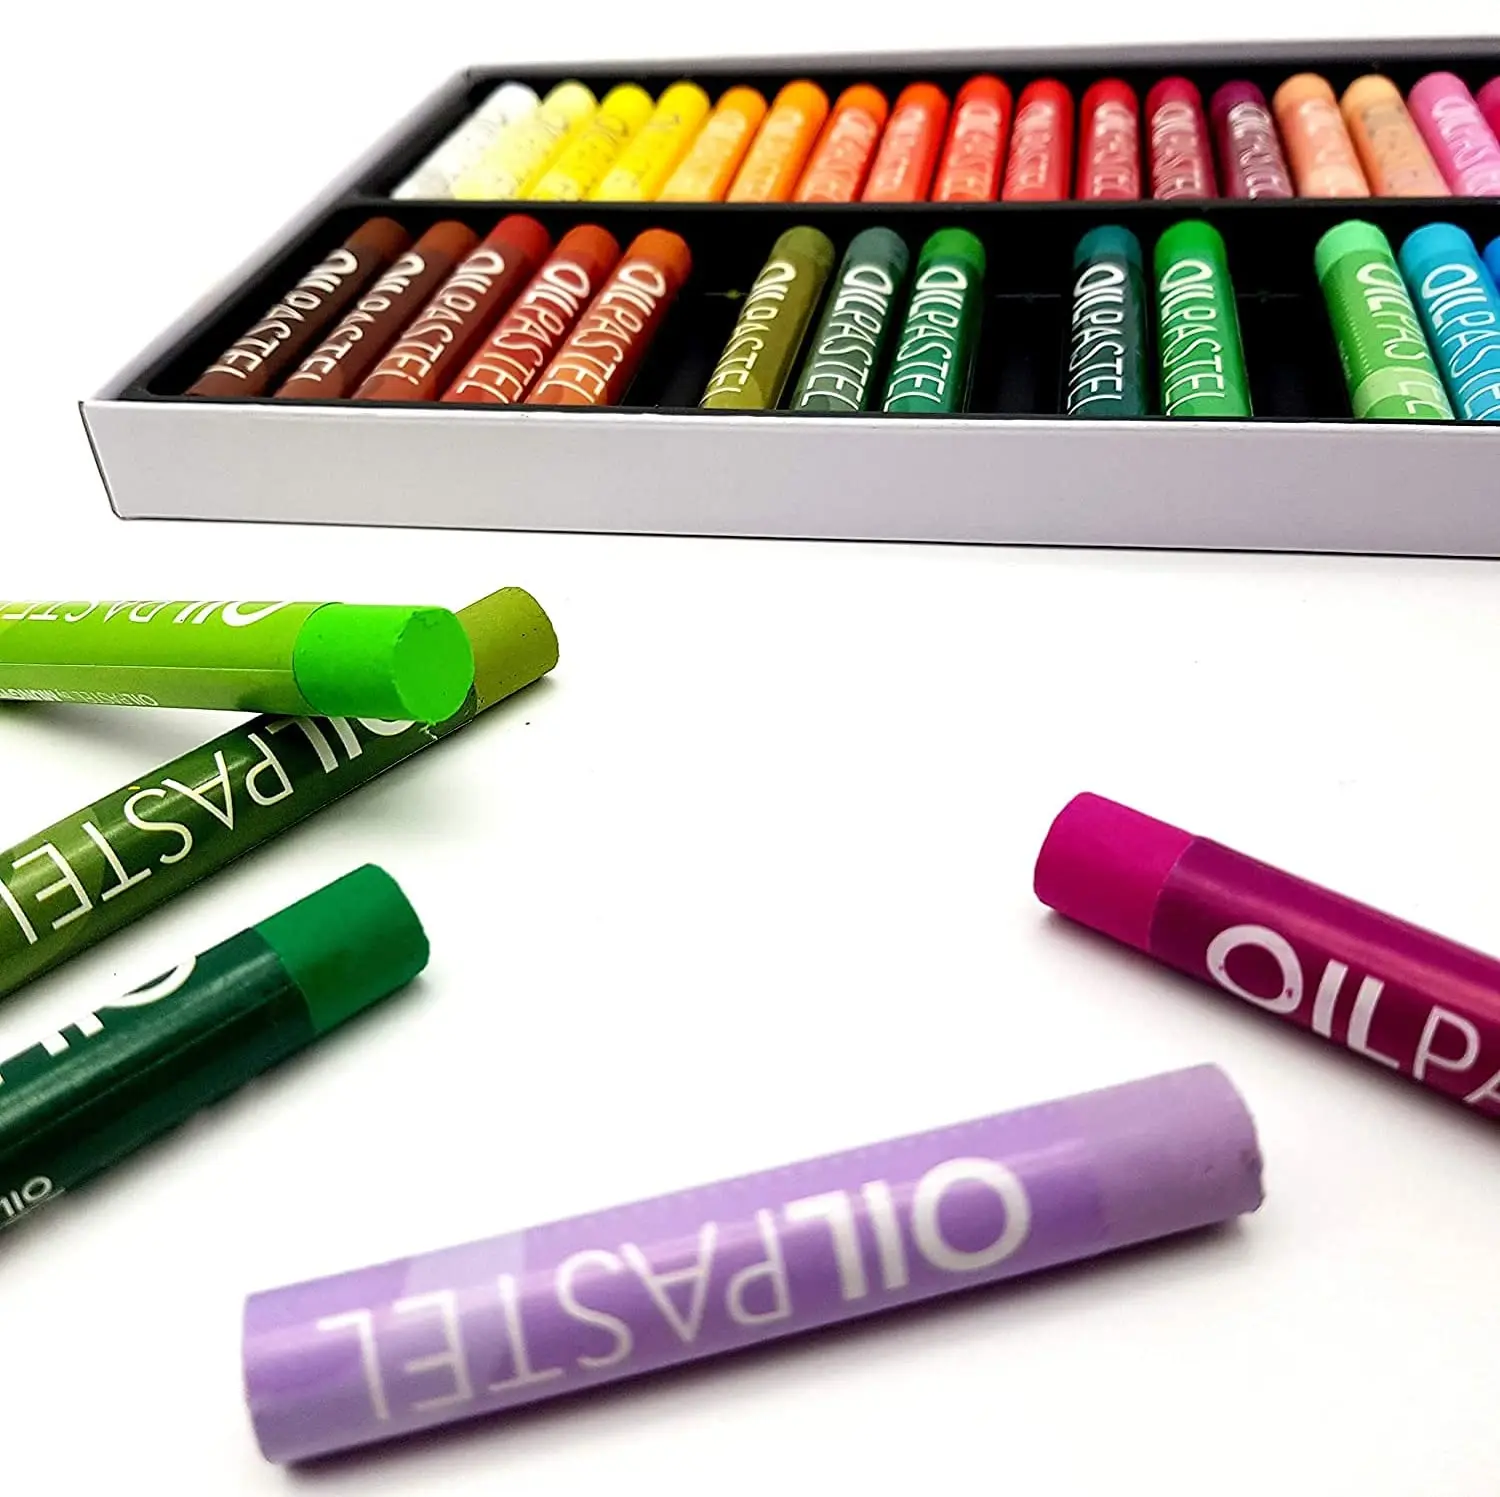 48colors Mungyo Gallery Soft Oil Pastels Set Non Toxic Drawing